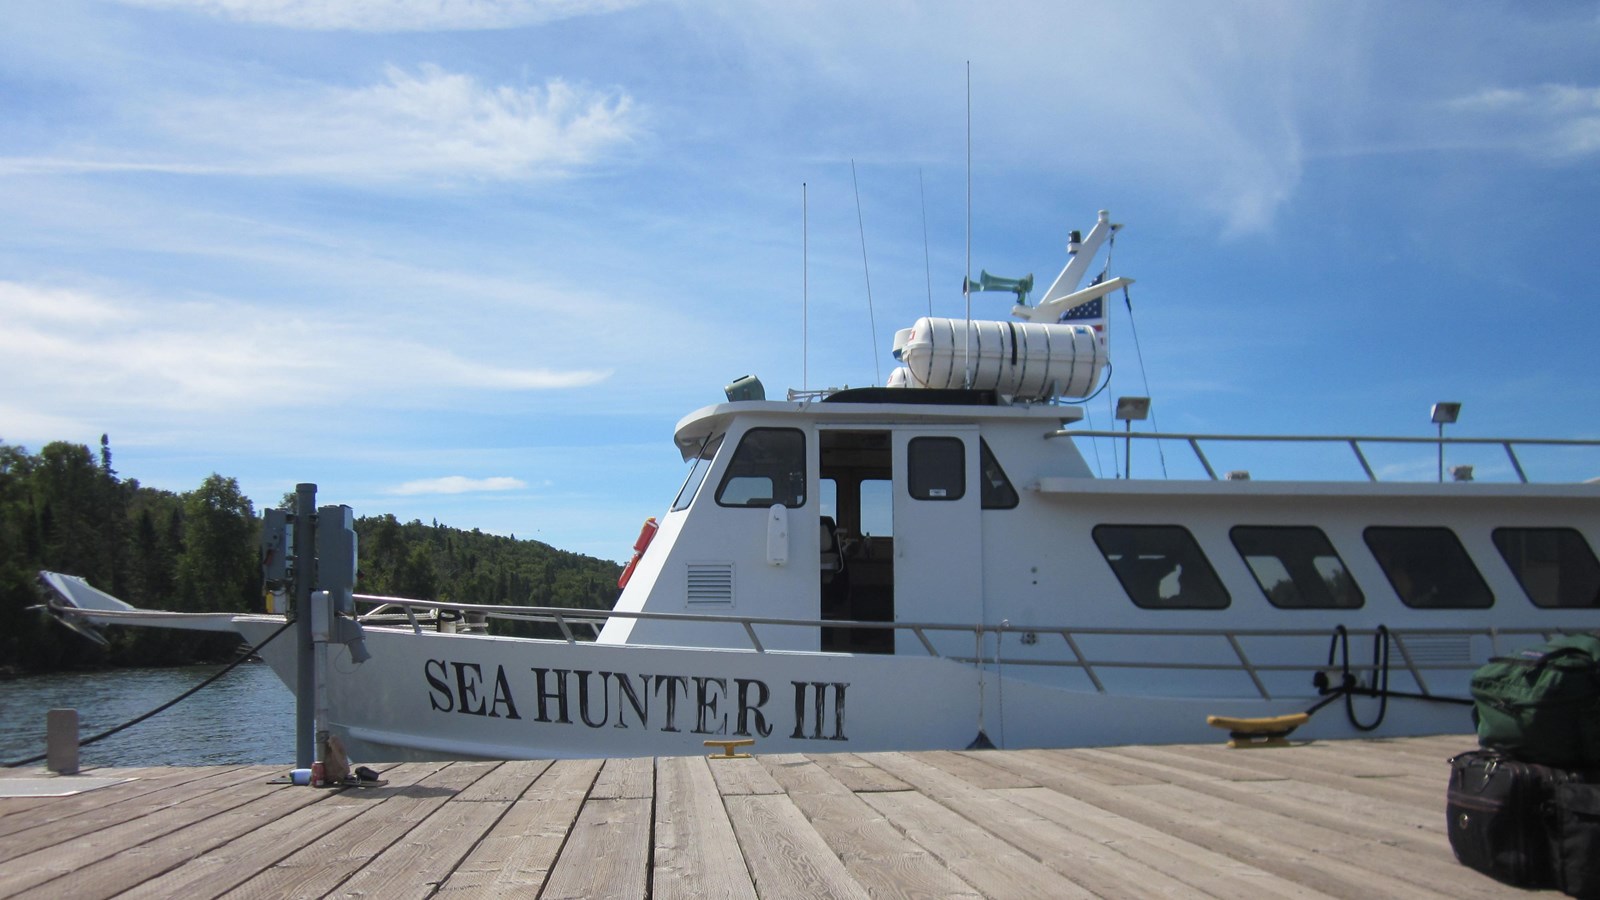 The Sea Hunter III, a white ferry, docked along a large wooden dock. Lightly clouded sky above. 